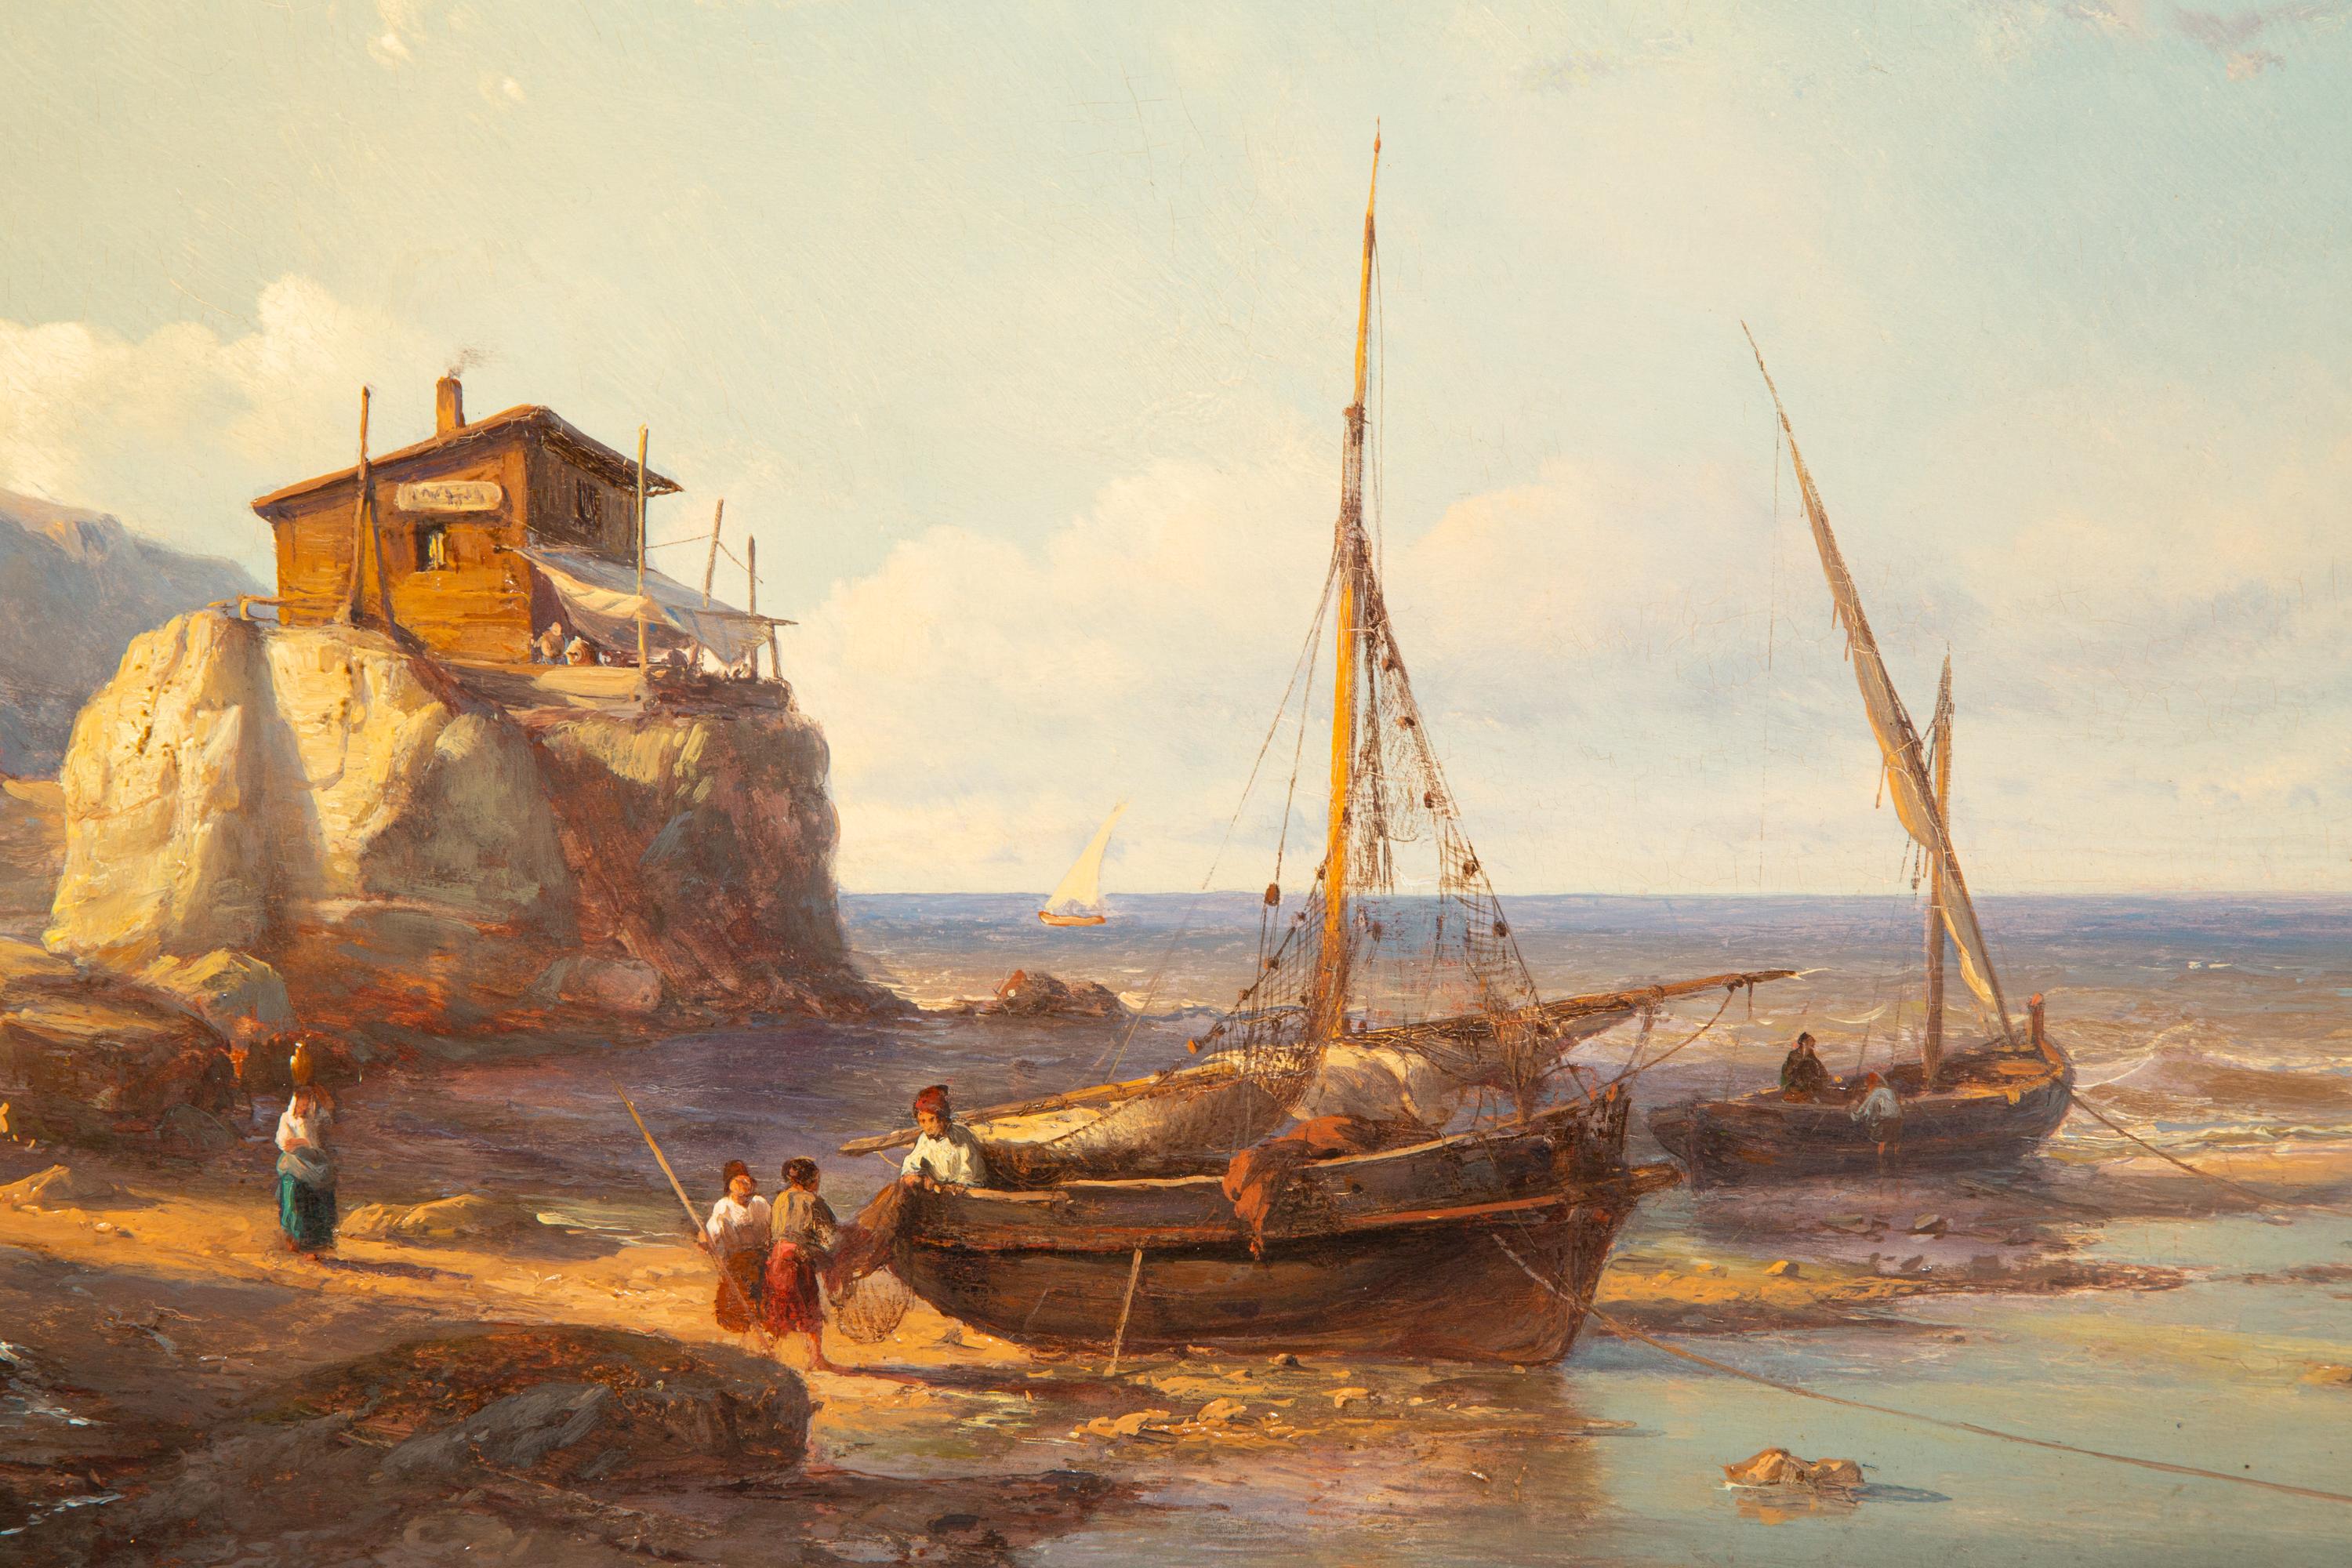 ‘Fishermen’s Cove with two fishing boats on the beach’ by Johan Hendrik Meijer - Romantic Painting by Meijer, Johan Hendrik Louis